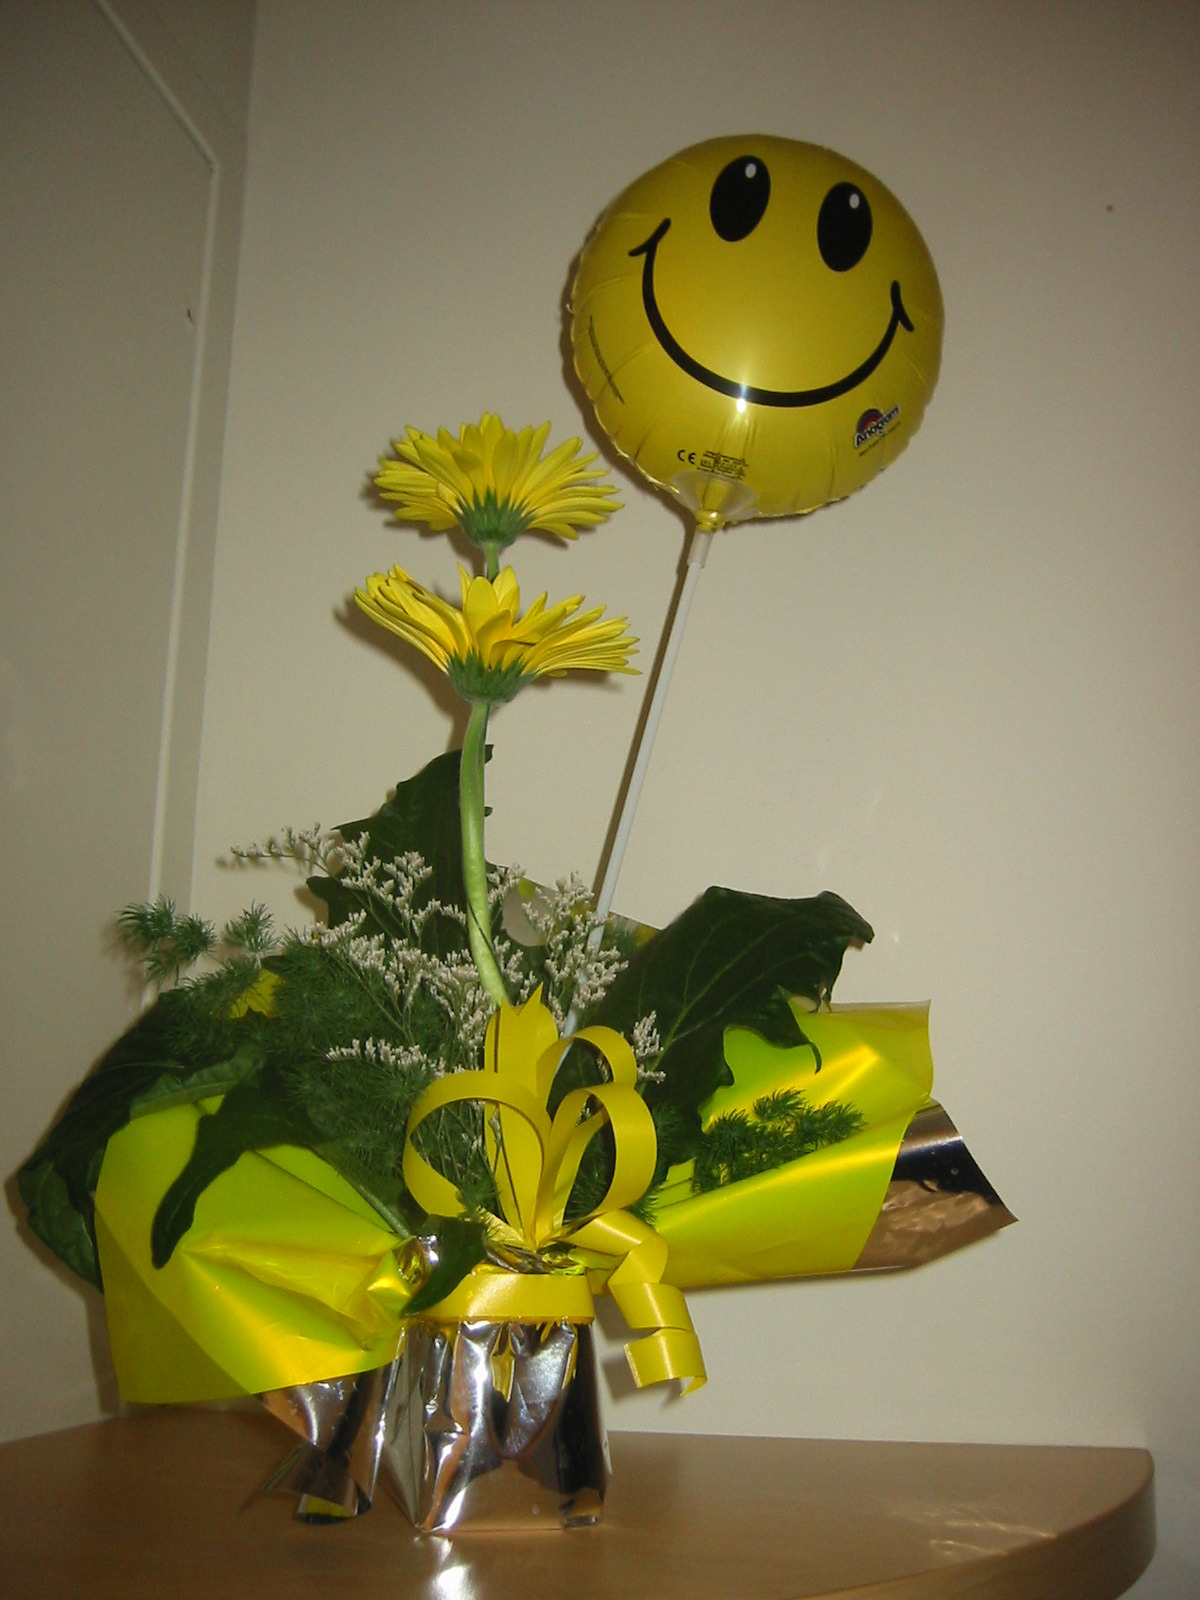 Flowers and smiley face for Jac